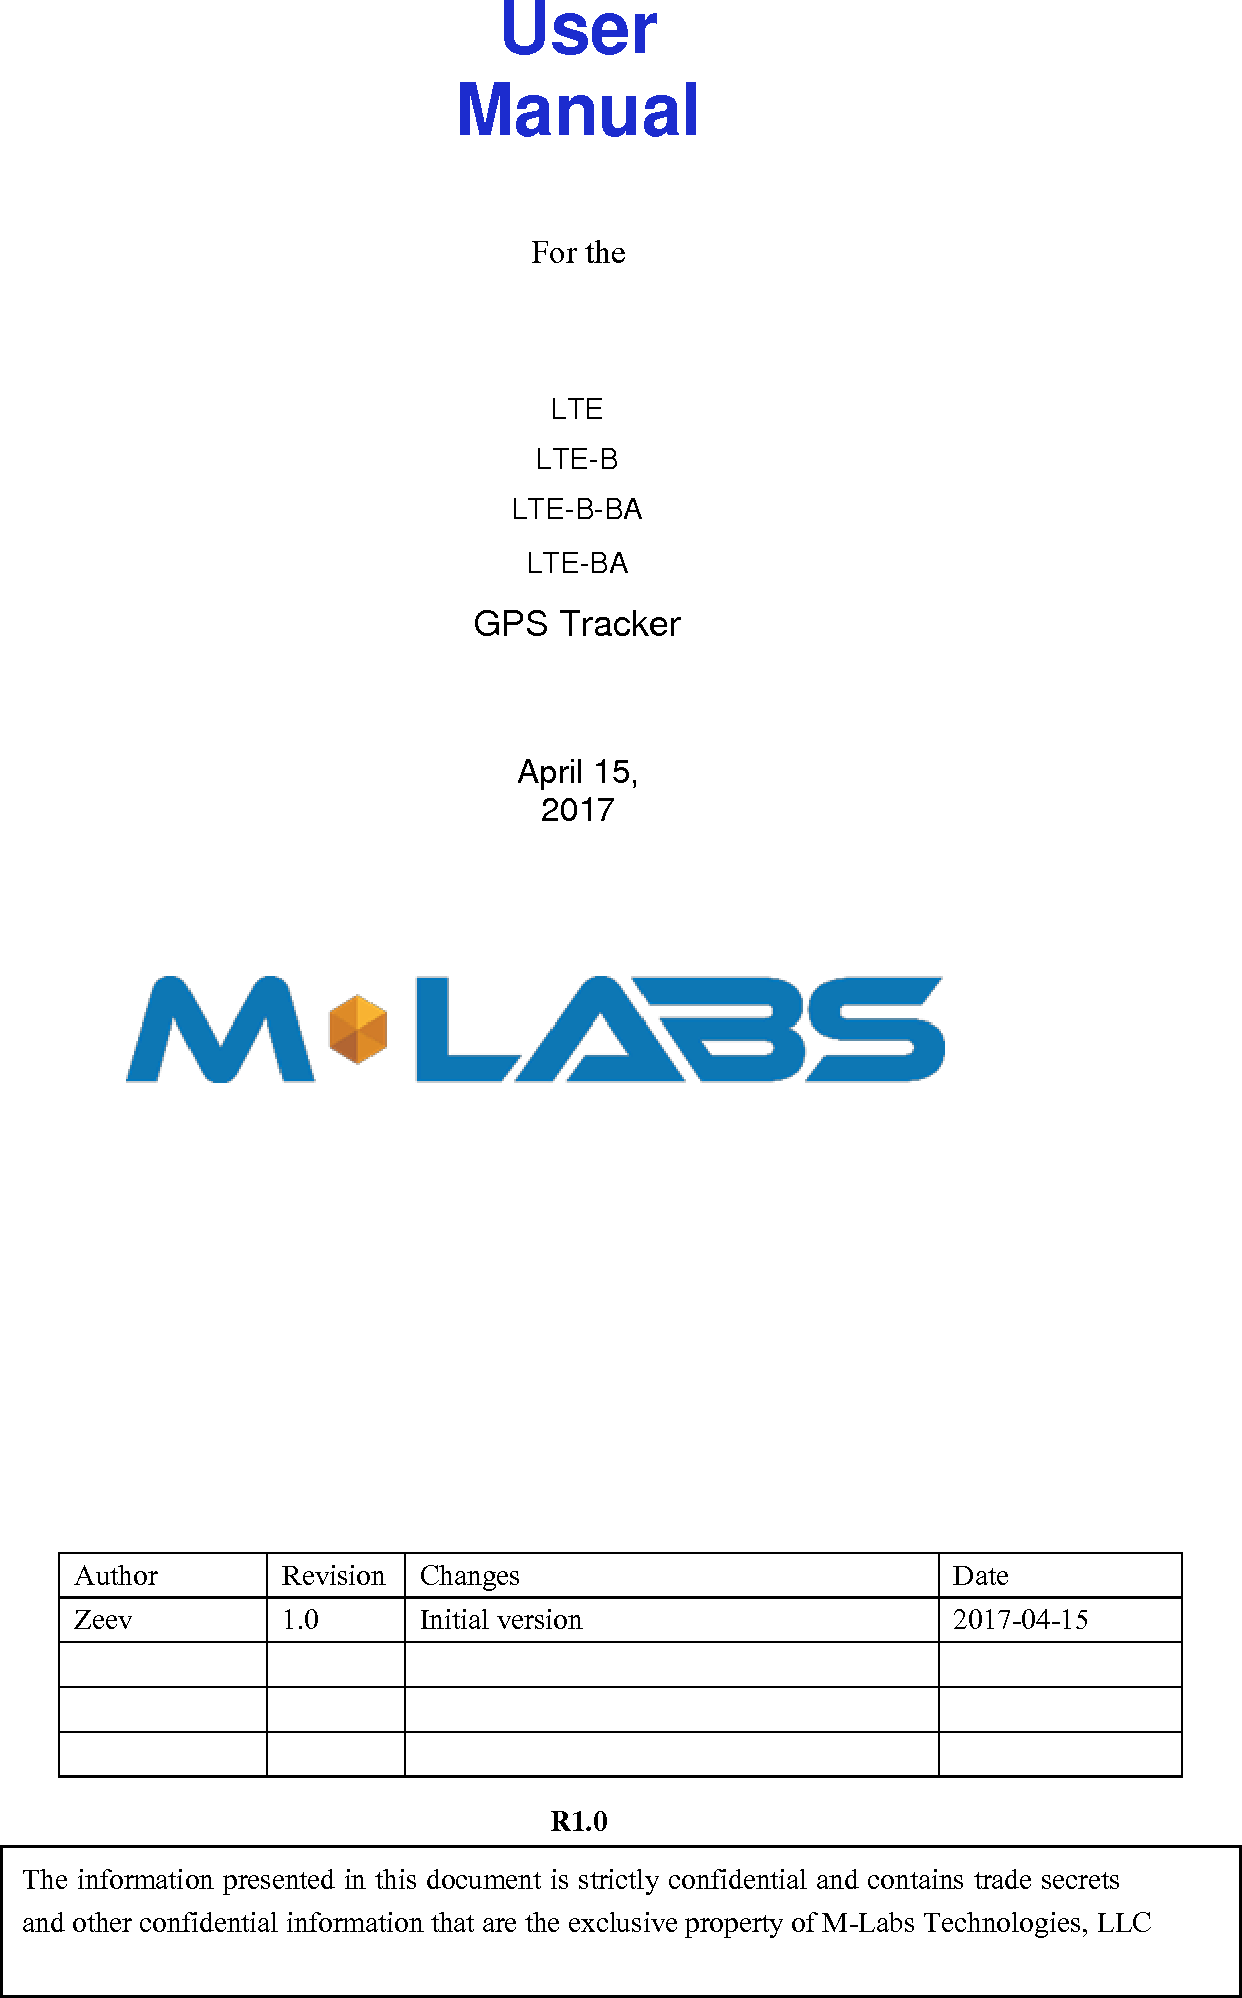 © 2017 M-Labs Technologies LLC  1 / 15          User Manual    For the    LTE LTE-B LTE-B-BA LTE-BA    April 15, 2017                                     R1.0  The information presented in this document is strictly confidential and contains trade secrets and other confidential information that are the exclusive property of M-Labs Technologies, LLC  GPS Tracker Author Revision Changes Date Zeev  1.0 Initial version 2017-04-15                